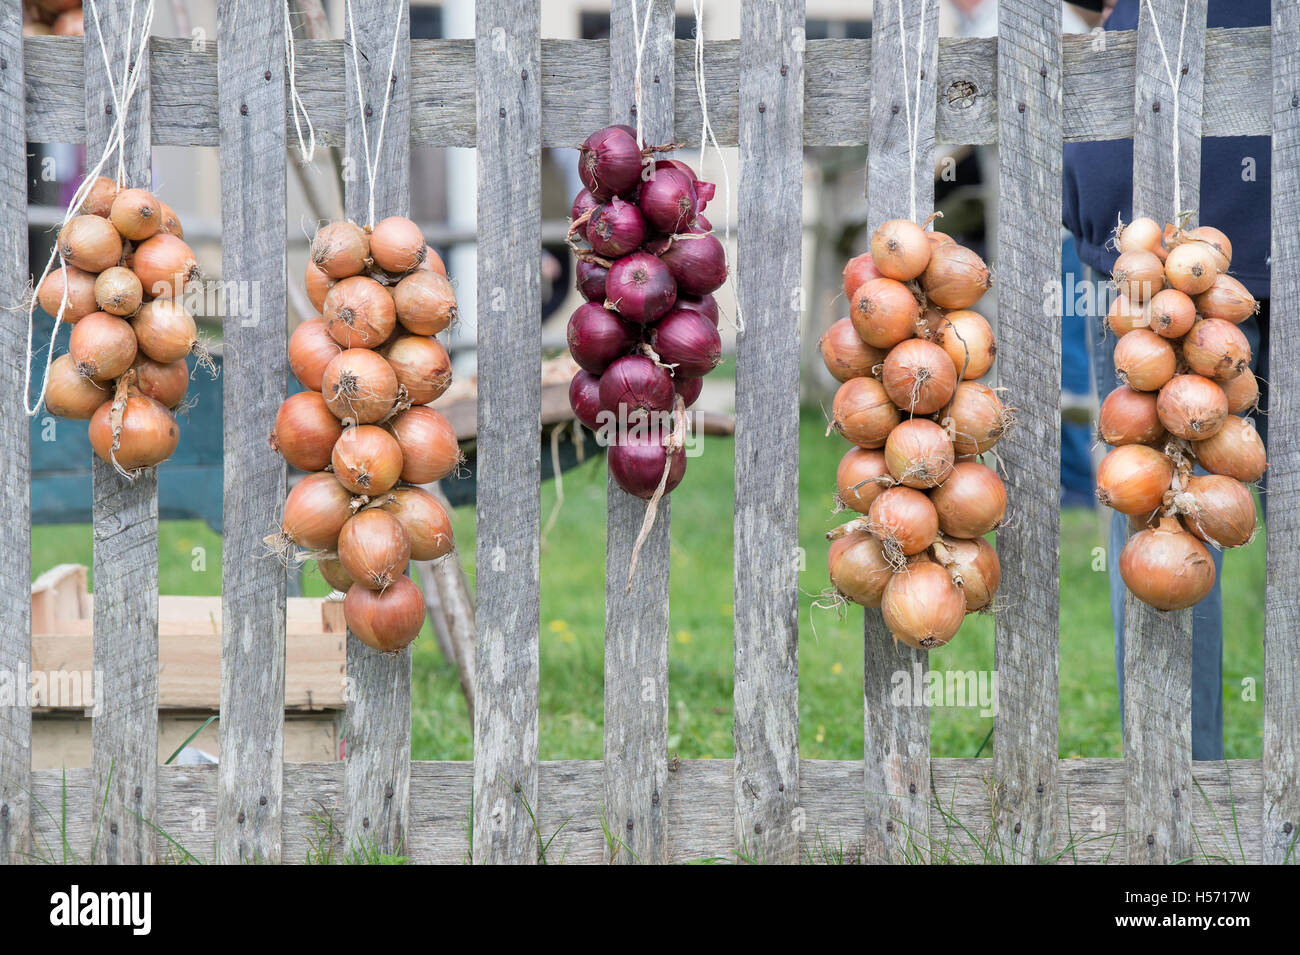 Strung up onions on a wooden fence. UK Stock Photo